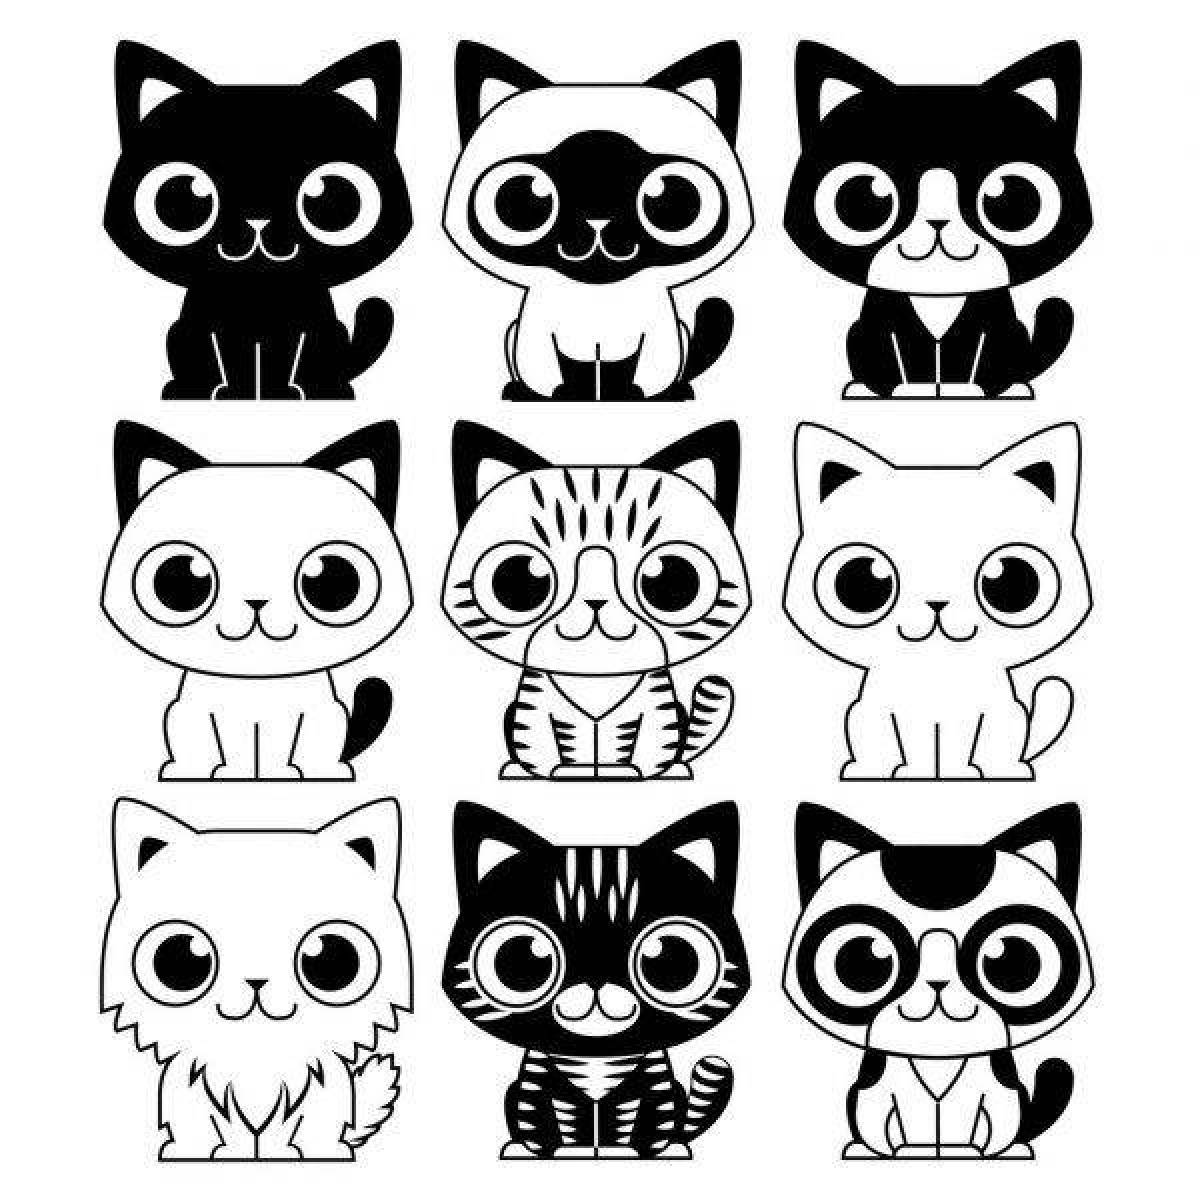 Coloring page of fun cat stickers